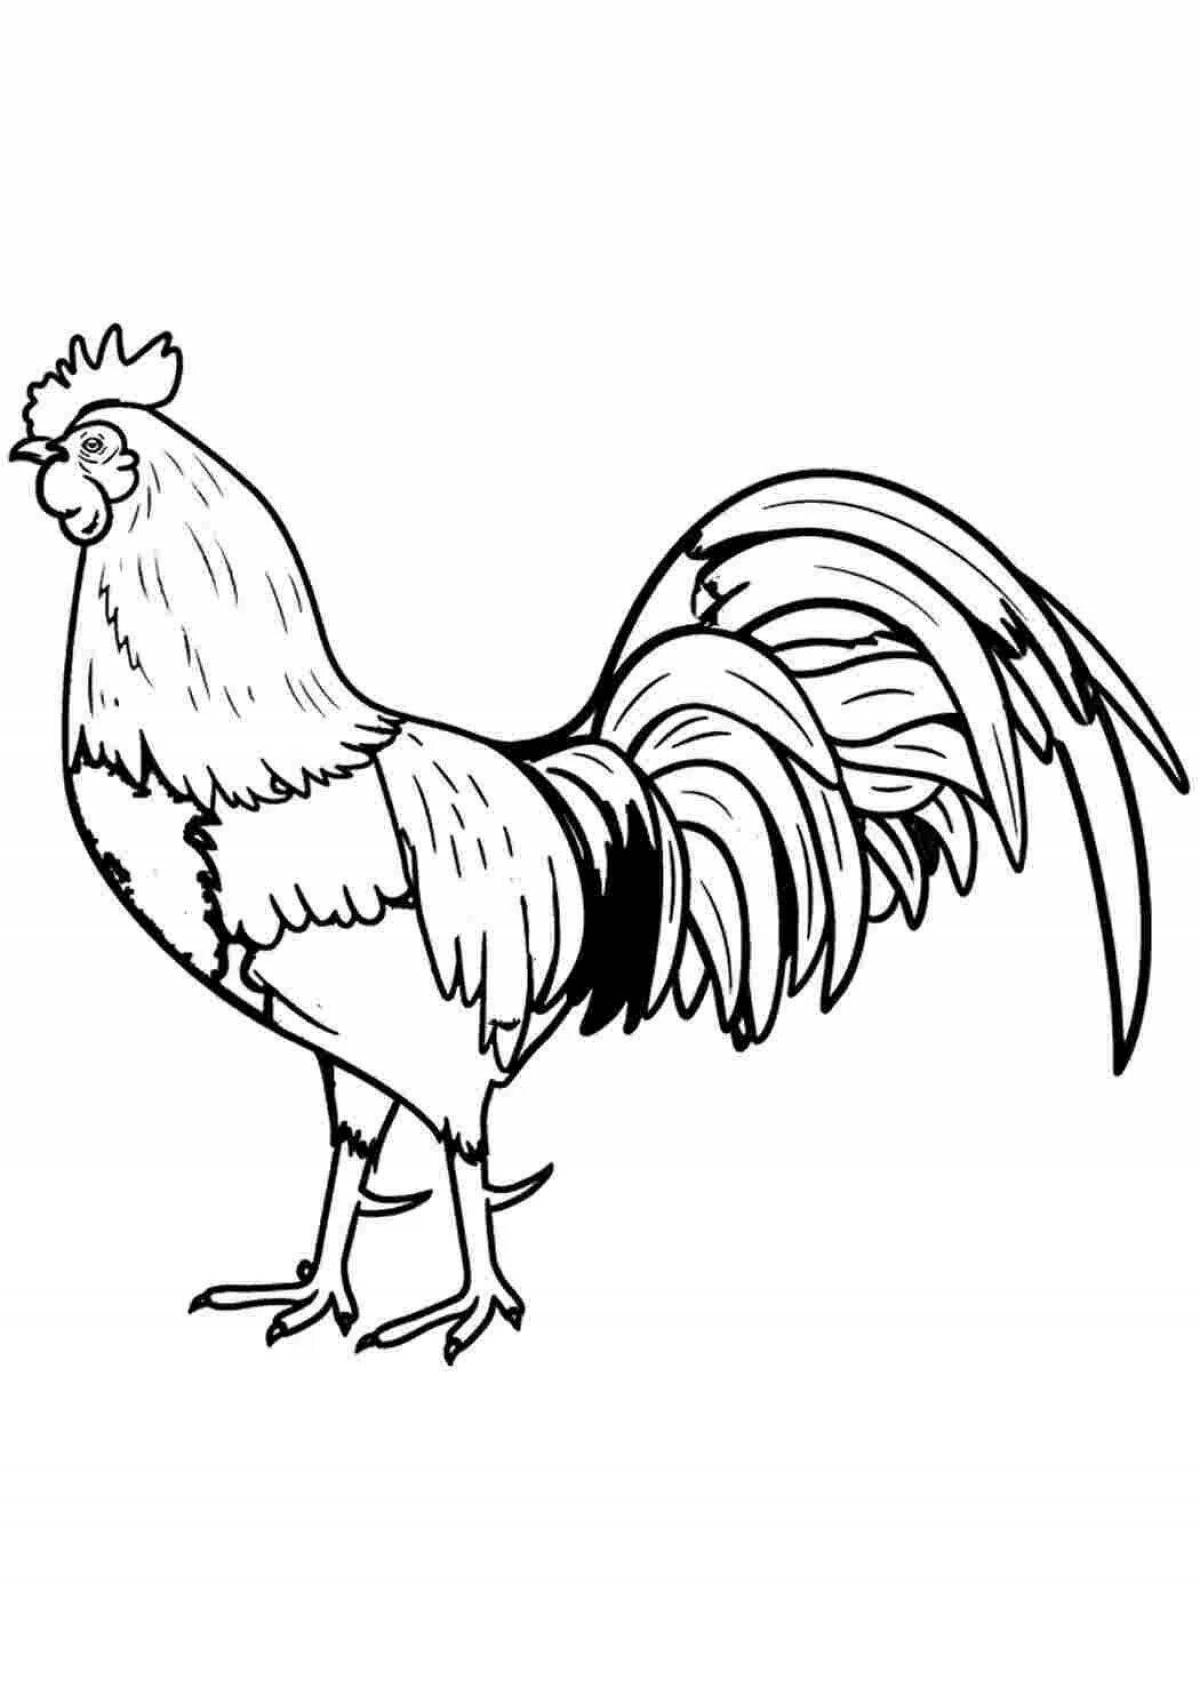 Rooster inspirational coloring book for 6-7 year olds